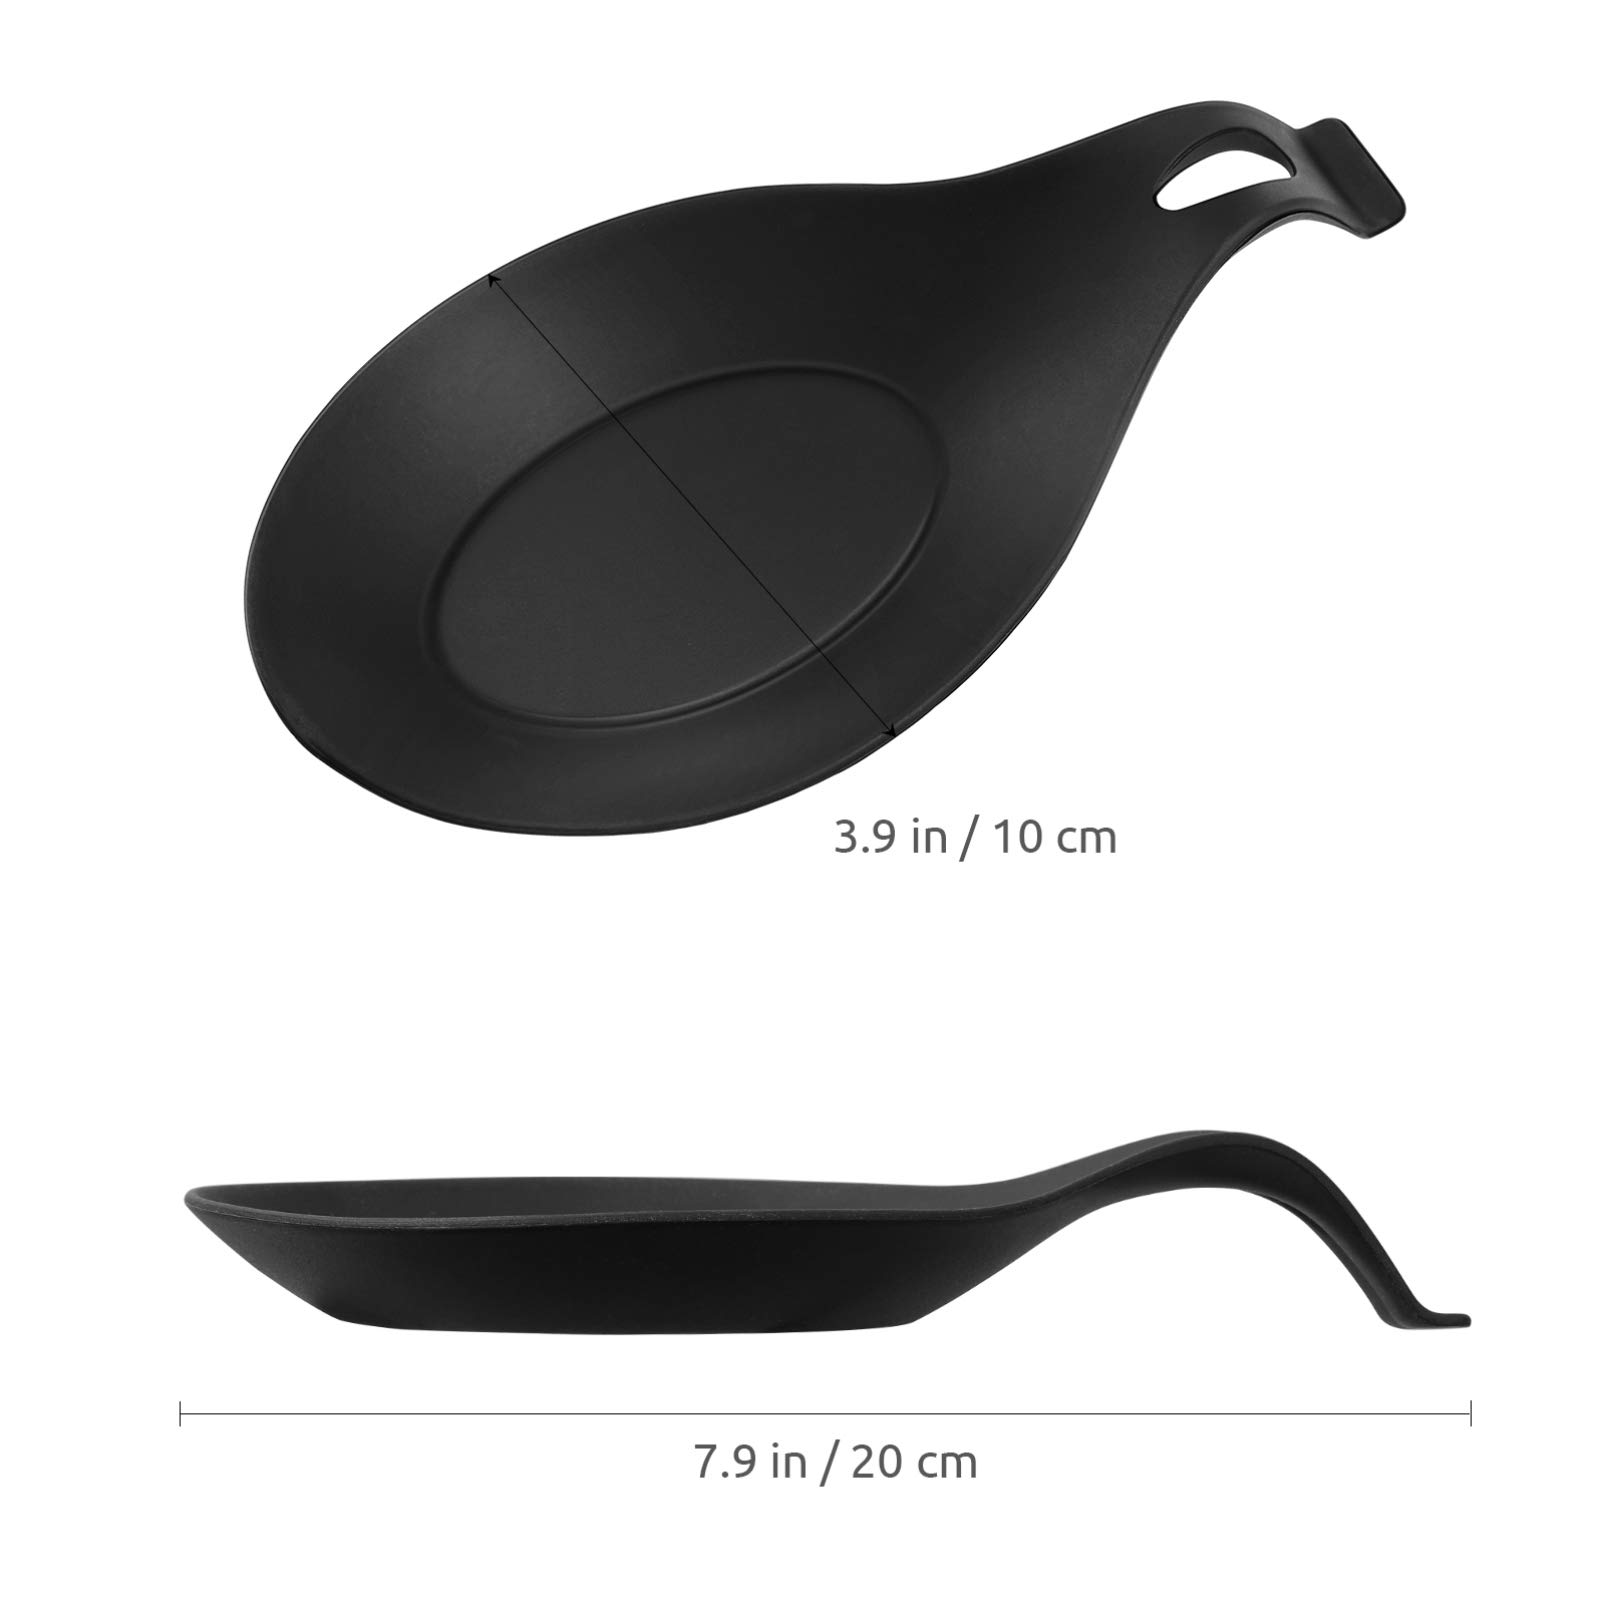 DOITOOL 2PCS Black Silicone Spoon Rests for Kitchen Counter Stove Top, Silicone Spoon Holder for Stove Top Countertop Spatula Ladle Spoon Utensil Holder